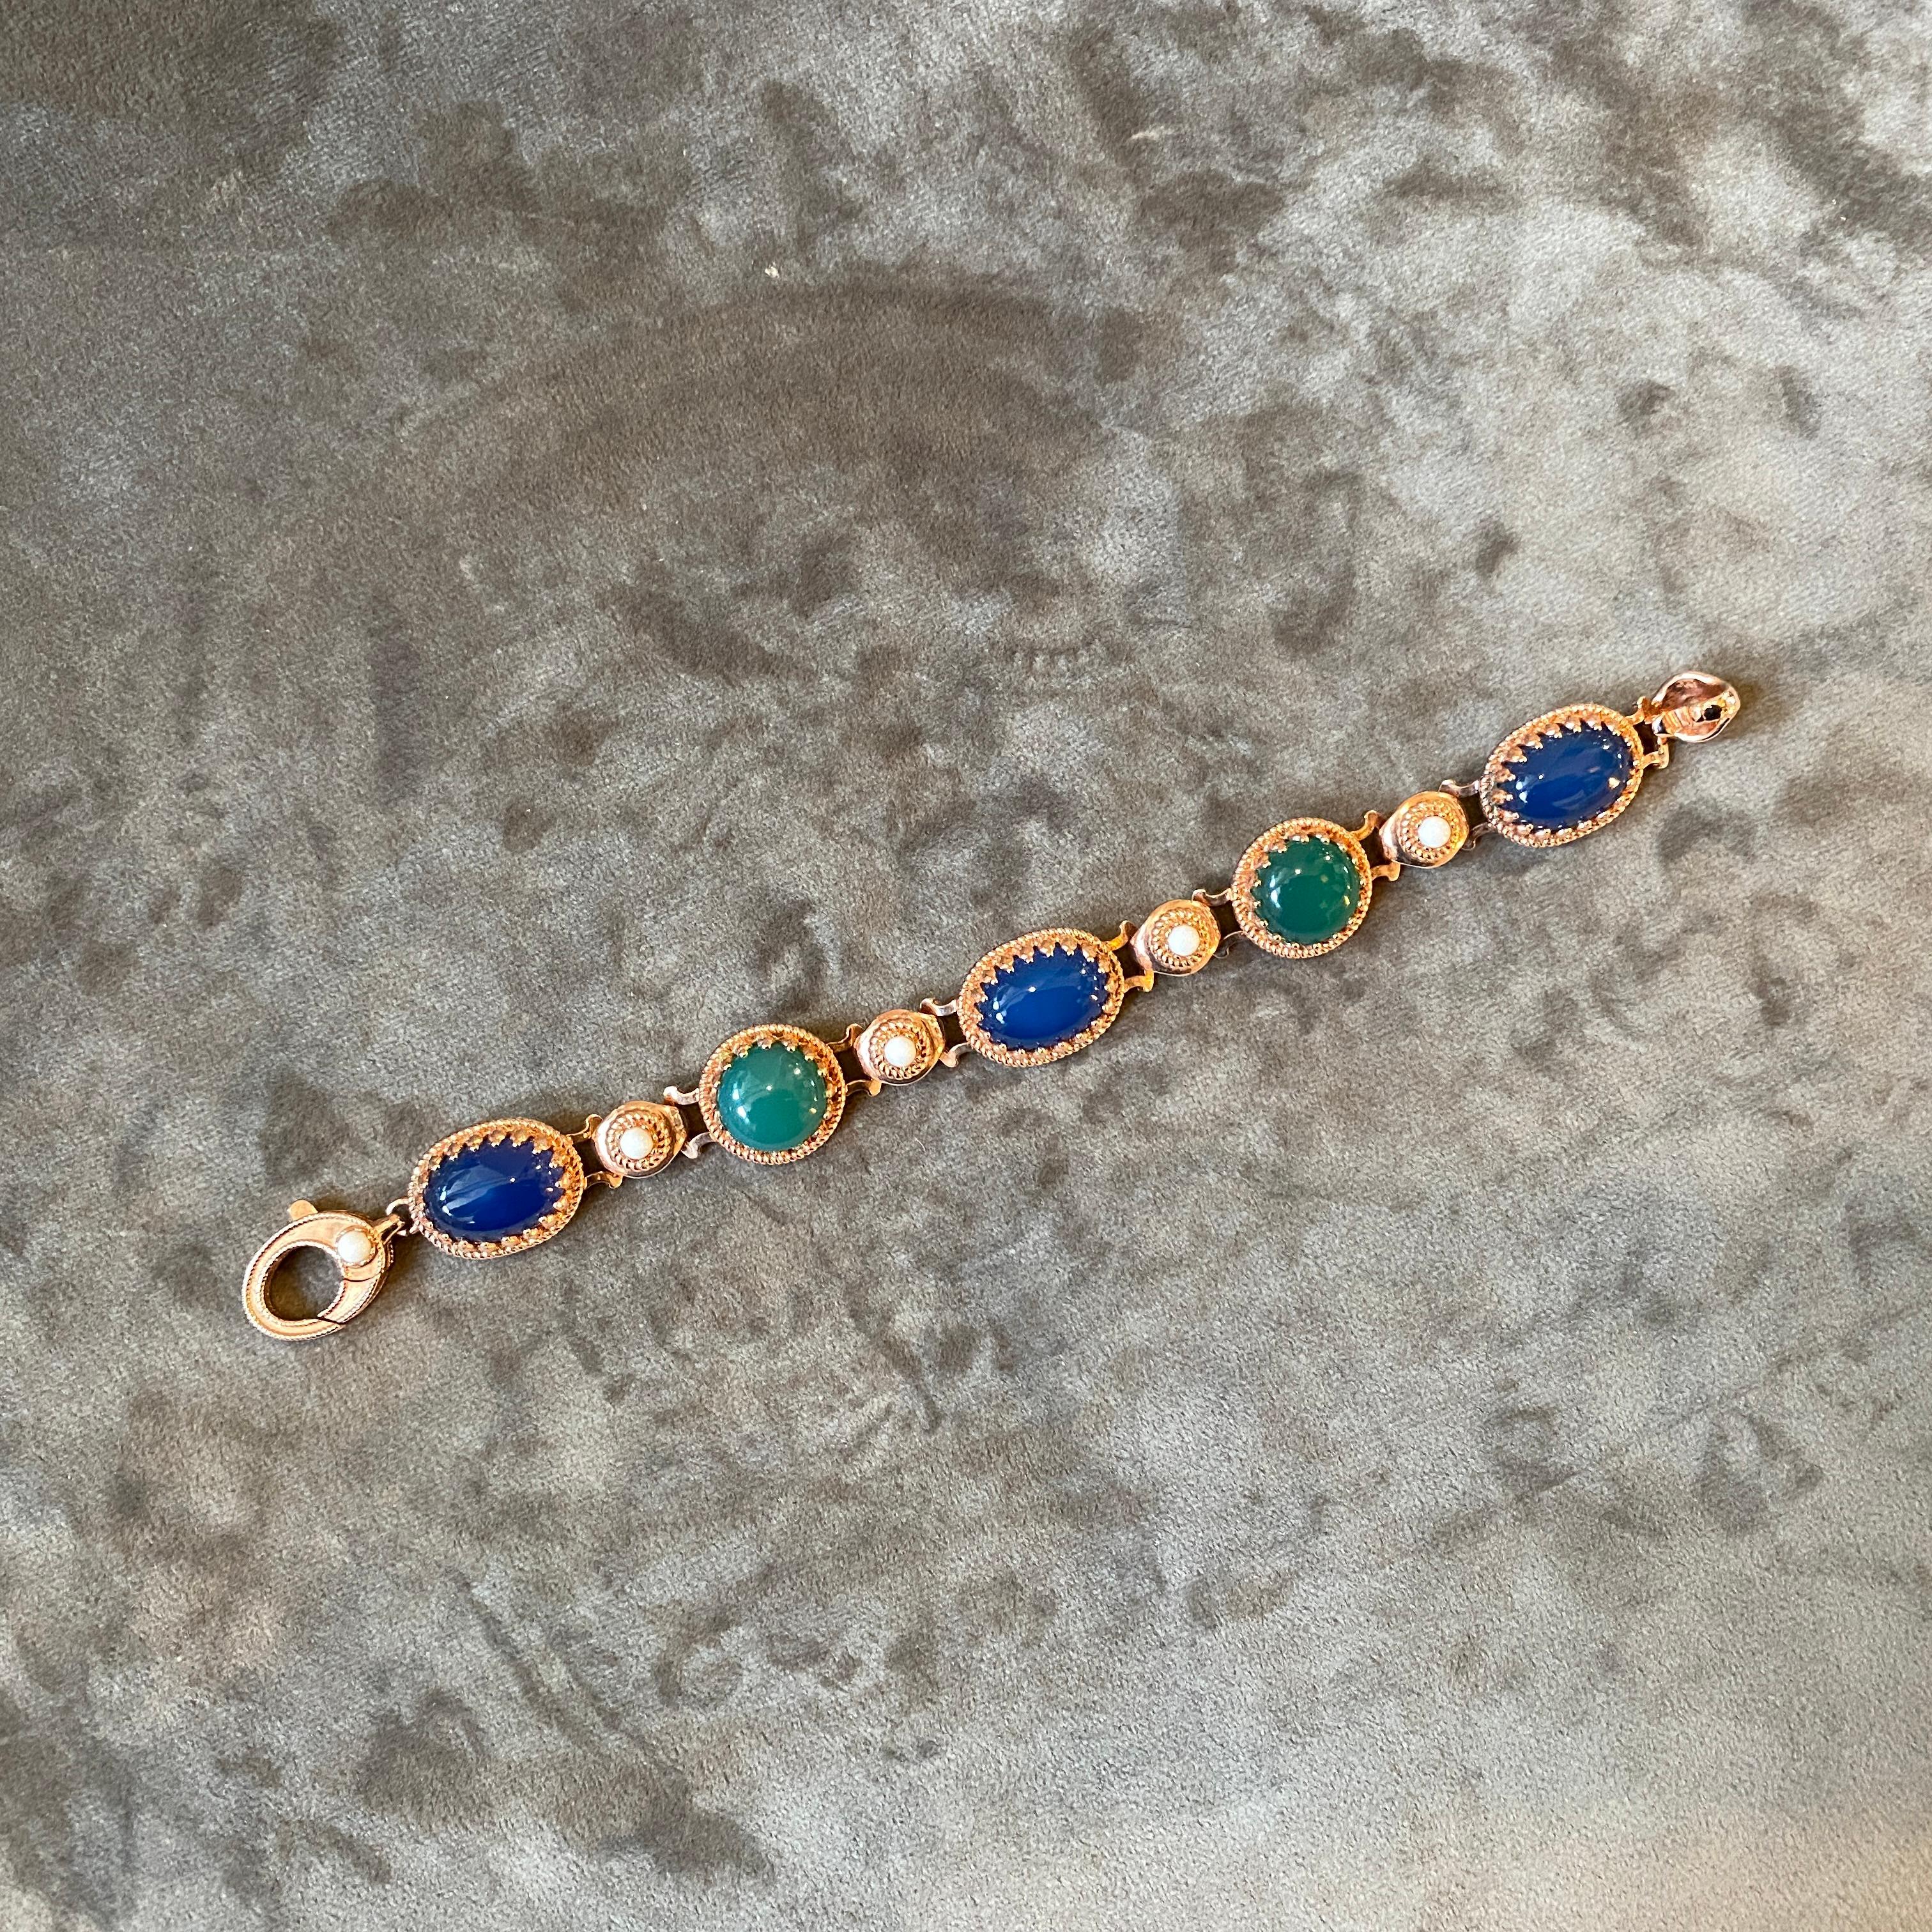 Retro 1990s Green and Blue Agate and Bronze Italian Bracelet by Anomis